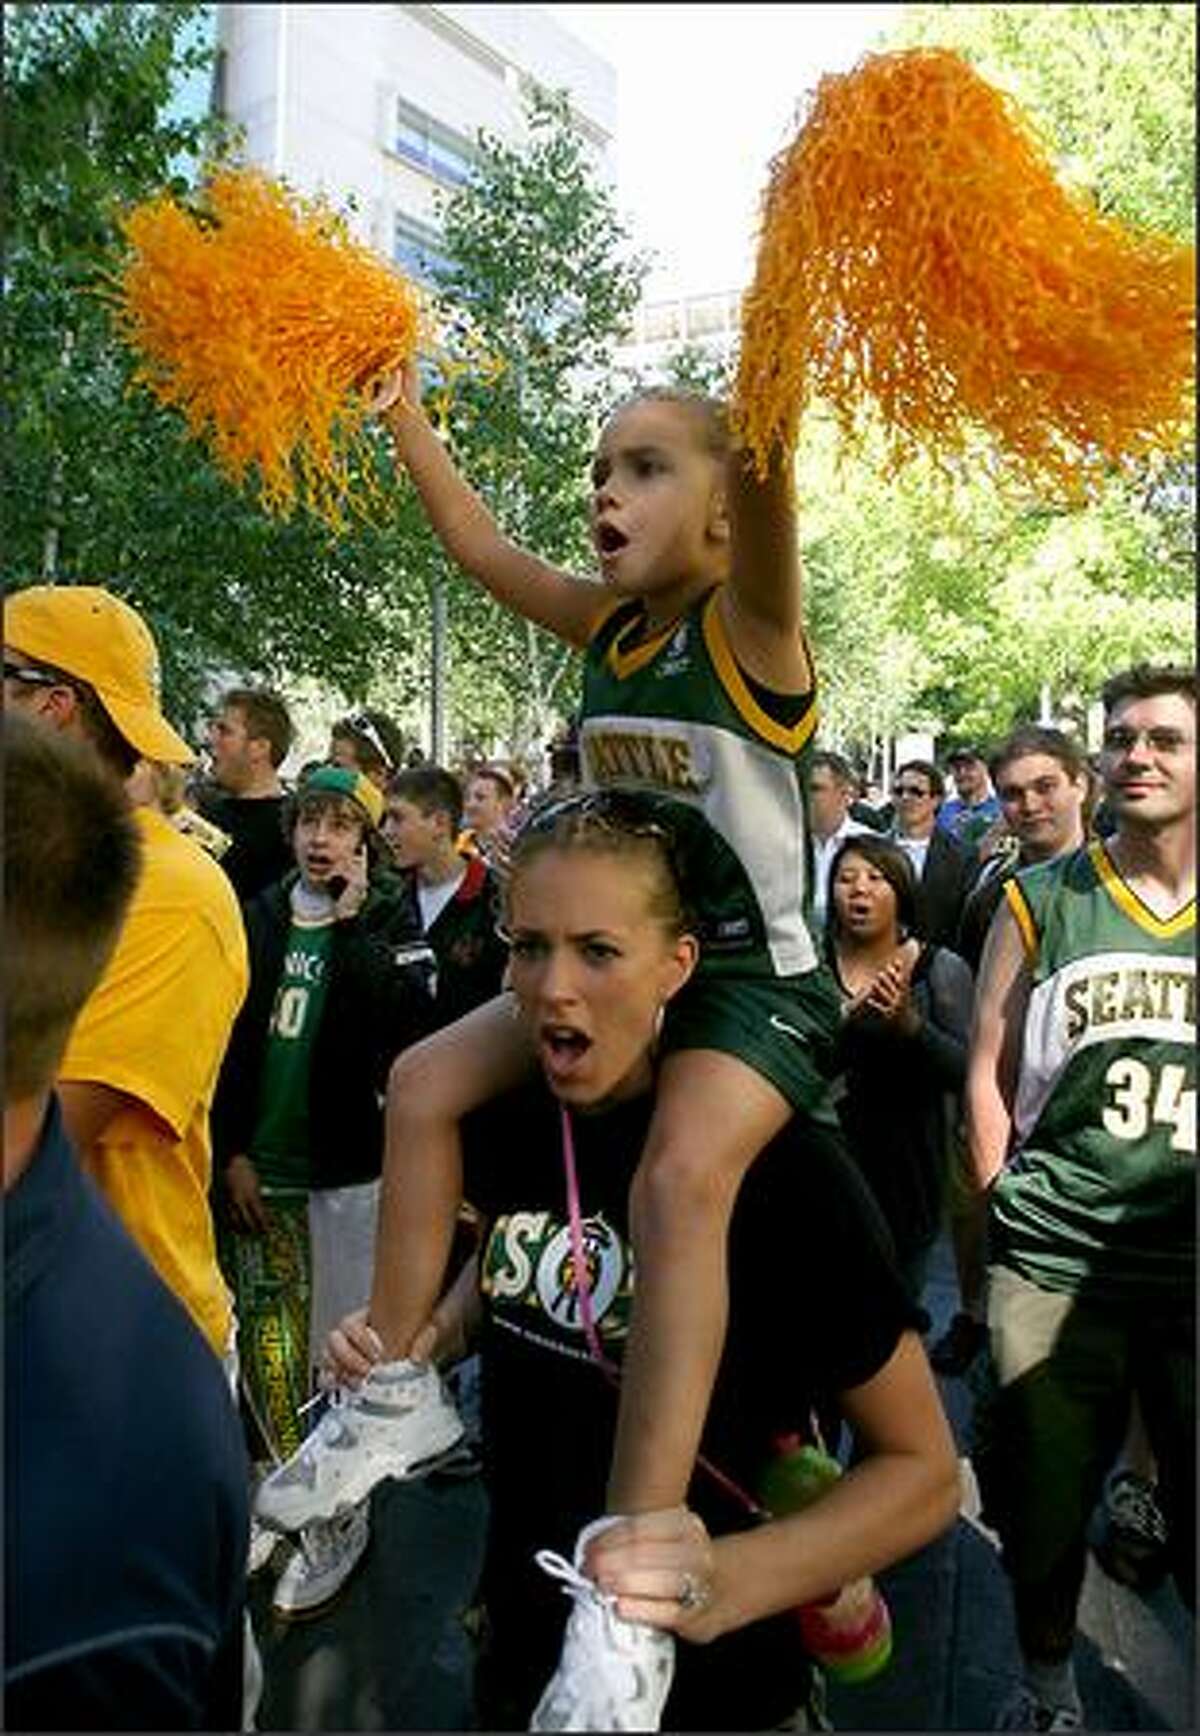 Seattle Sonics fans Rylee Reese, 5, and mother Emily Reese chant "Save Our Sonics," to show support for keeping the Sonics in Seattle.